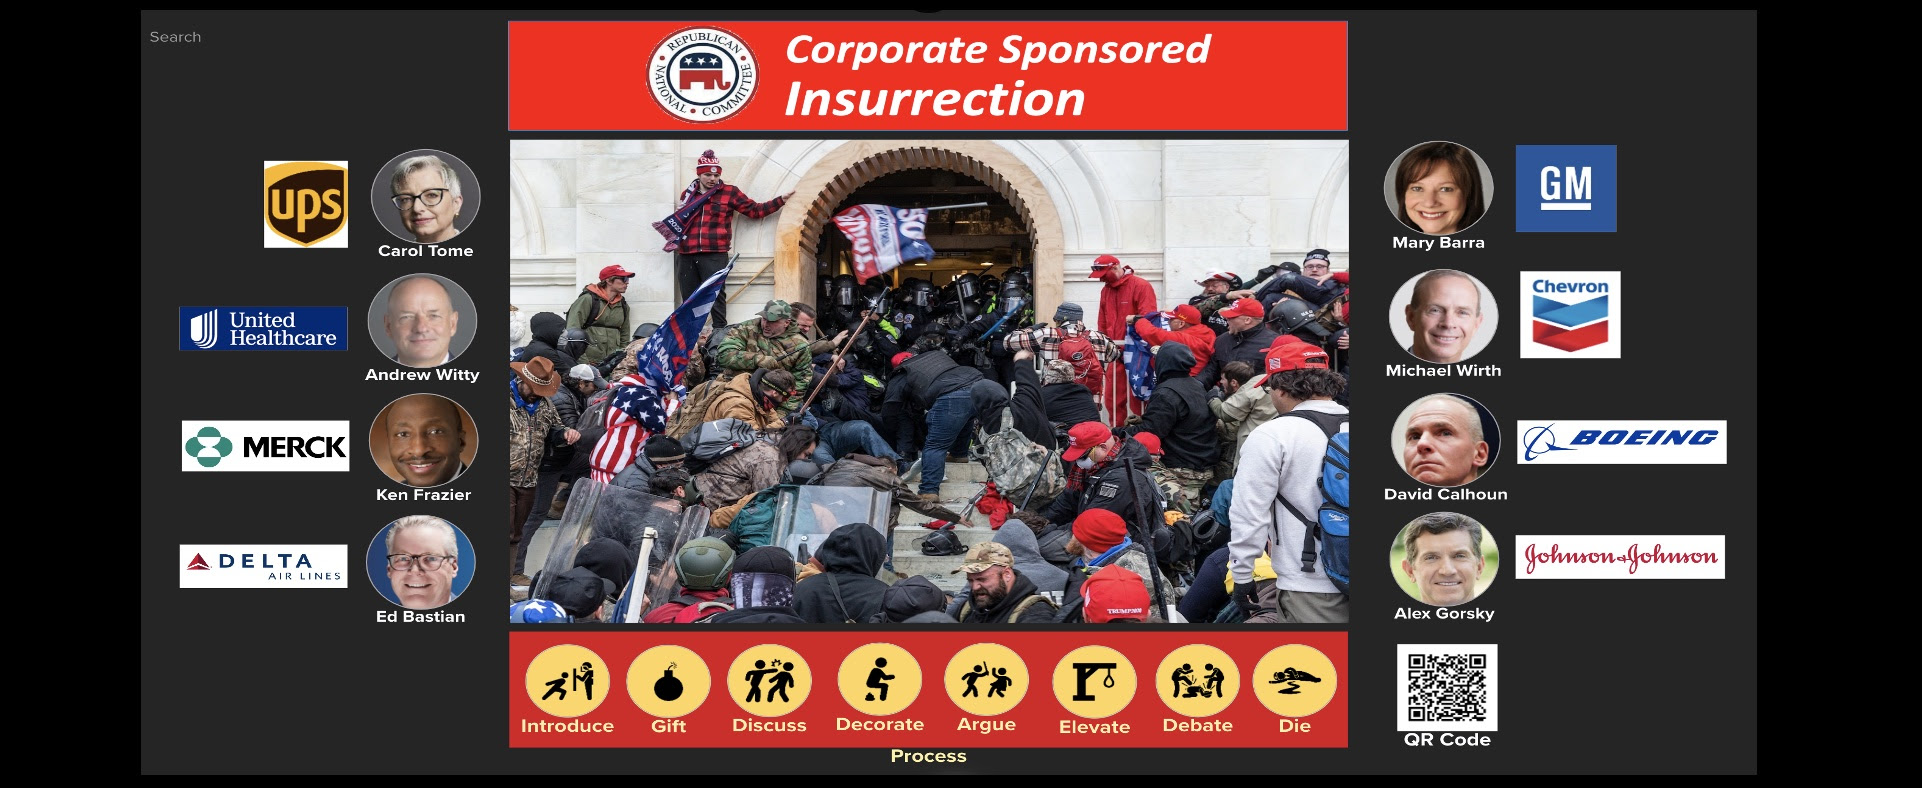 Corporate sponsored insurrection as companies donate to Republican National Committee.